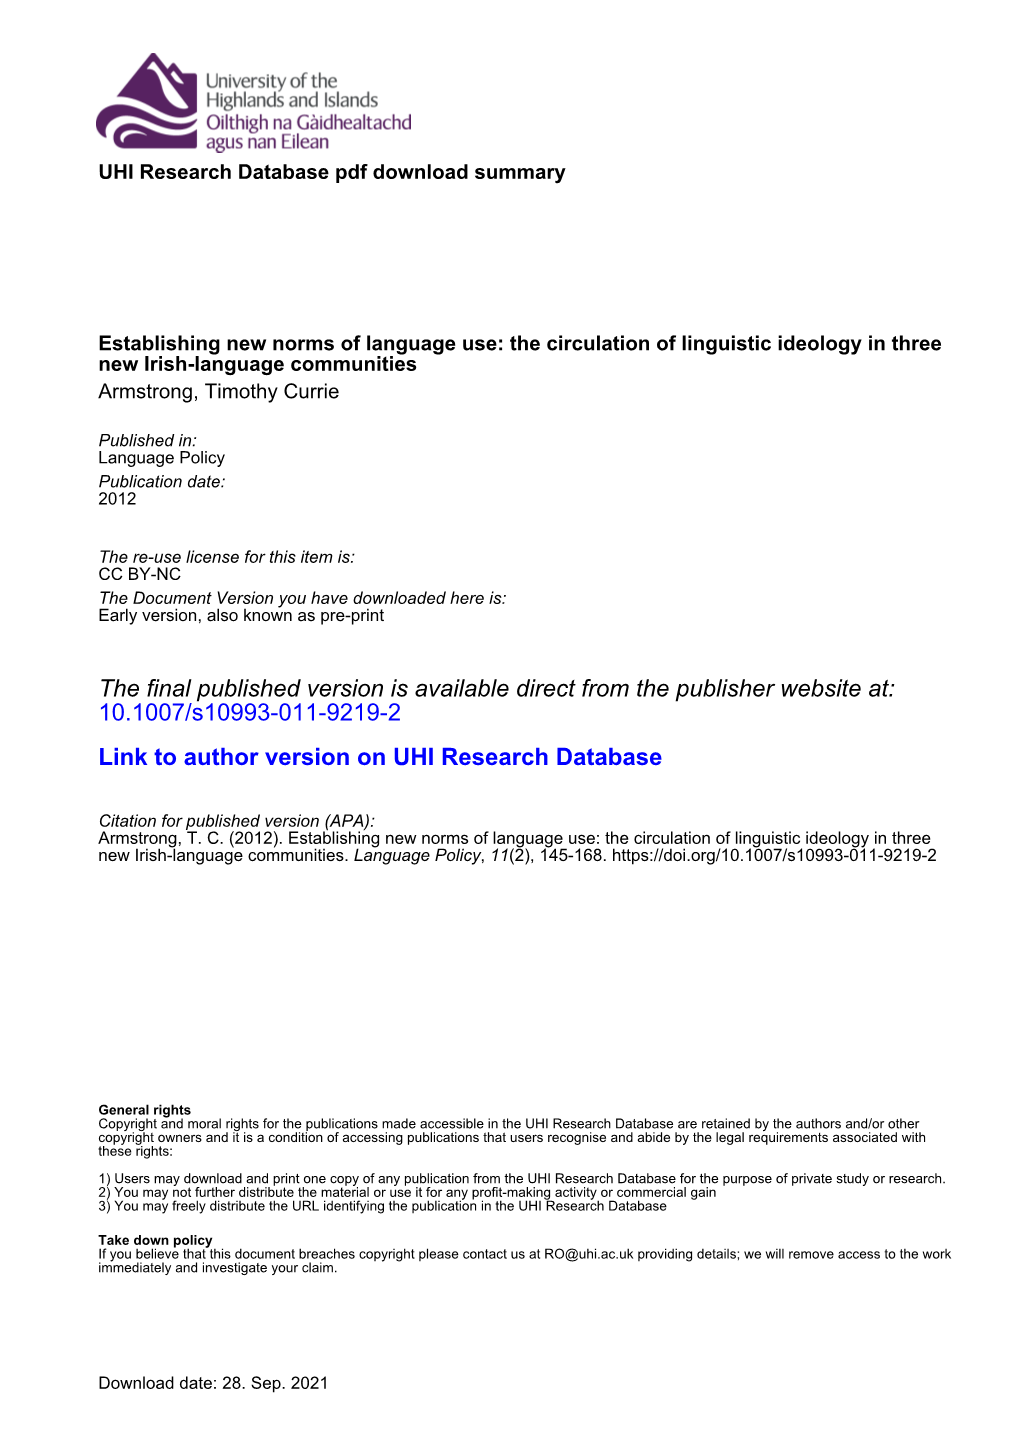 UHI Research Database Pdf Download Summary